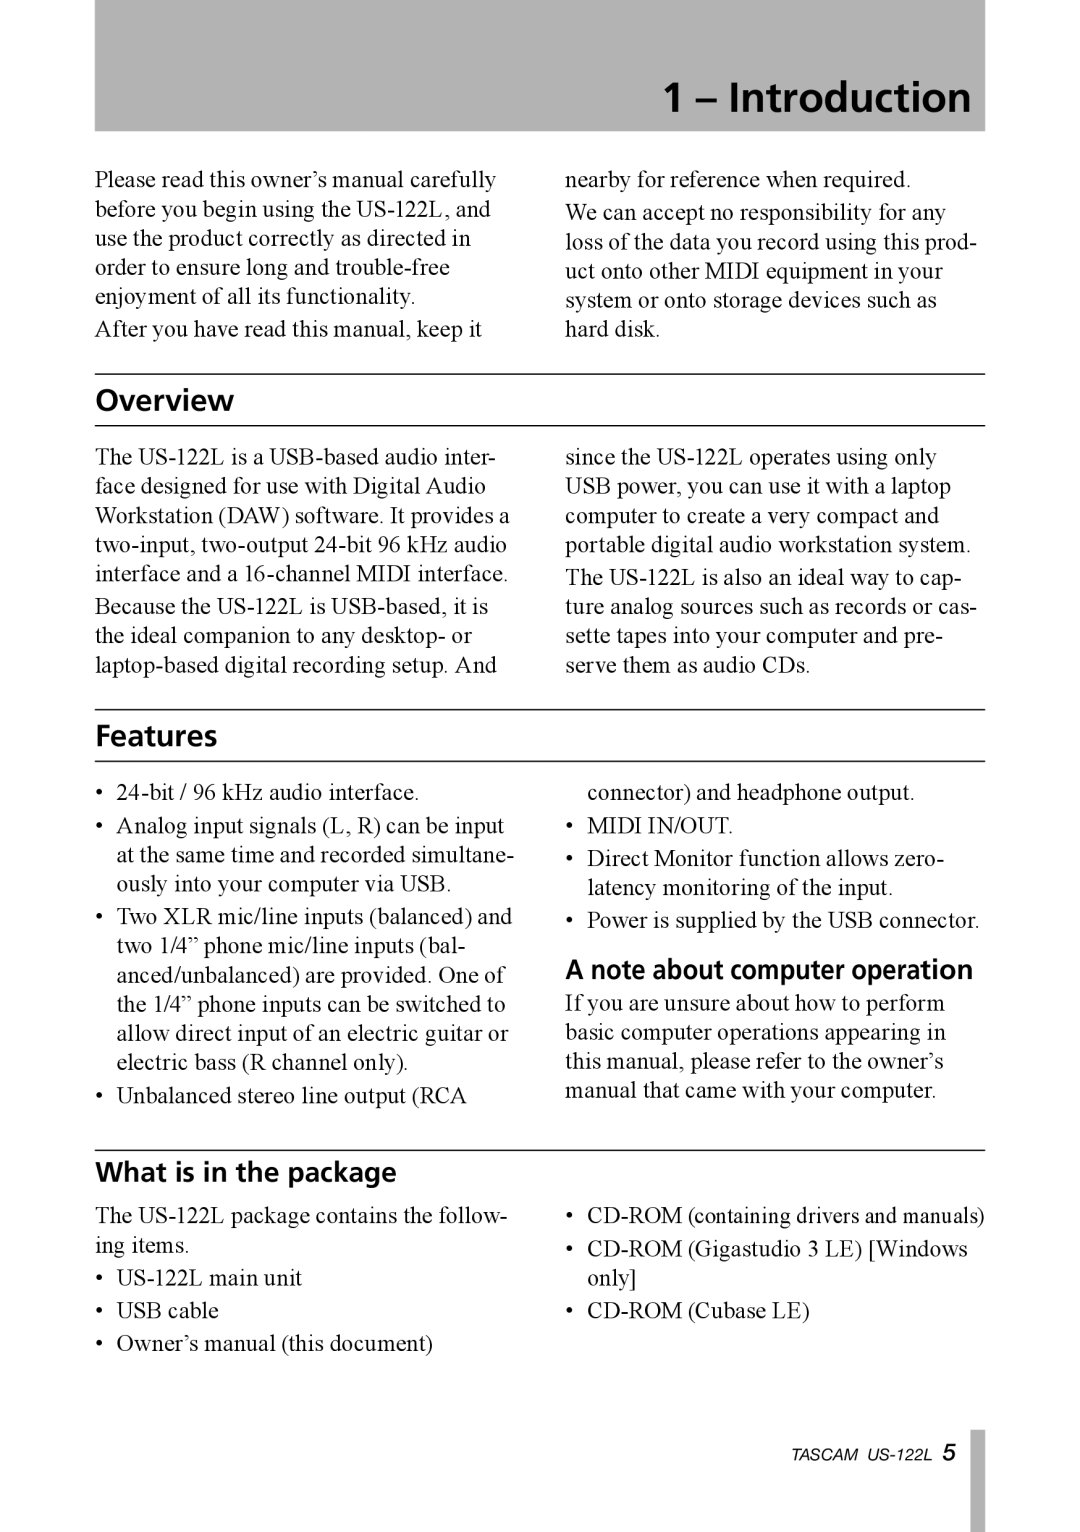 Tascam US-122L owner manual Introduction, Overview, Features, A note about computer operation, What is in the package 